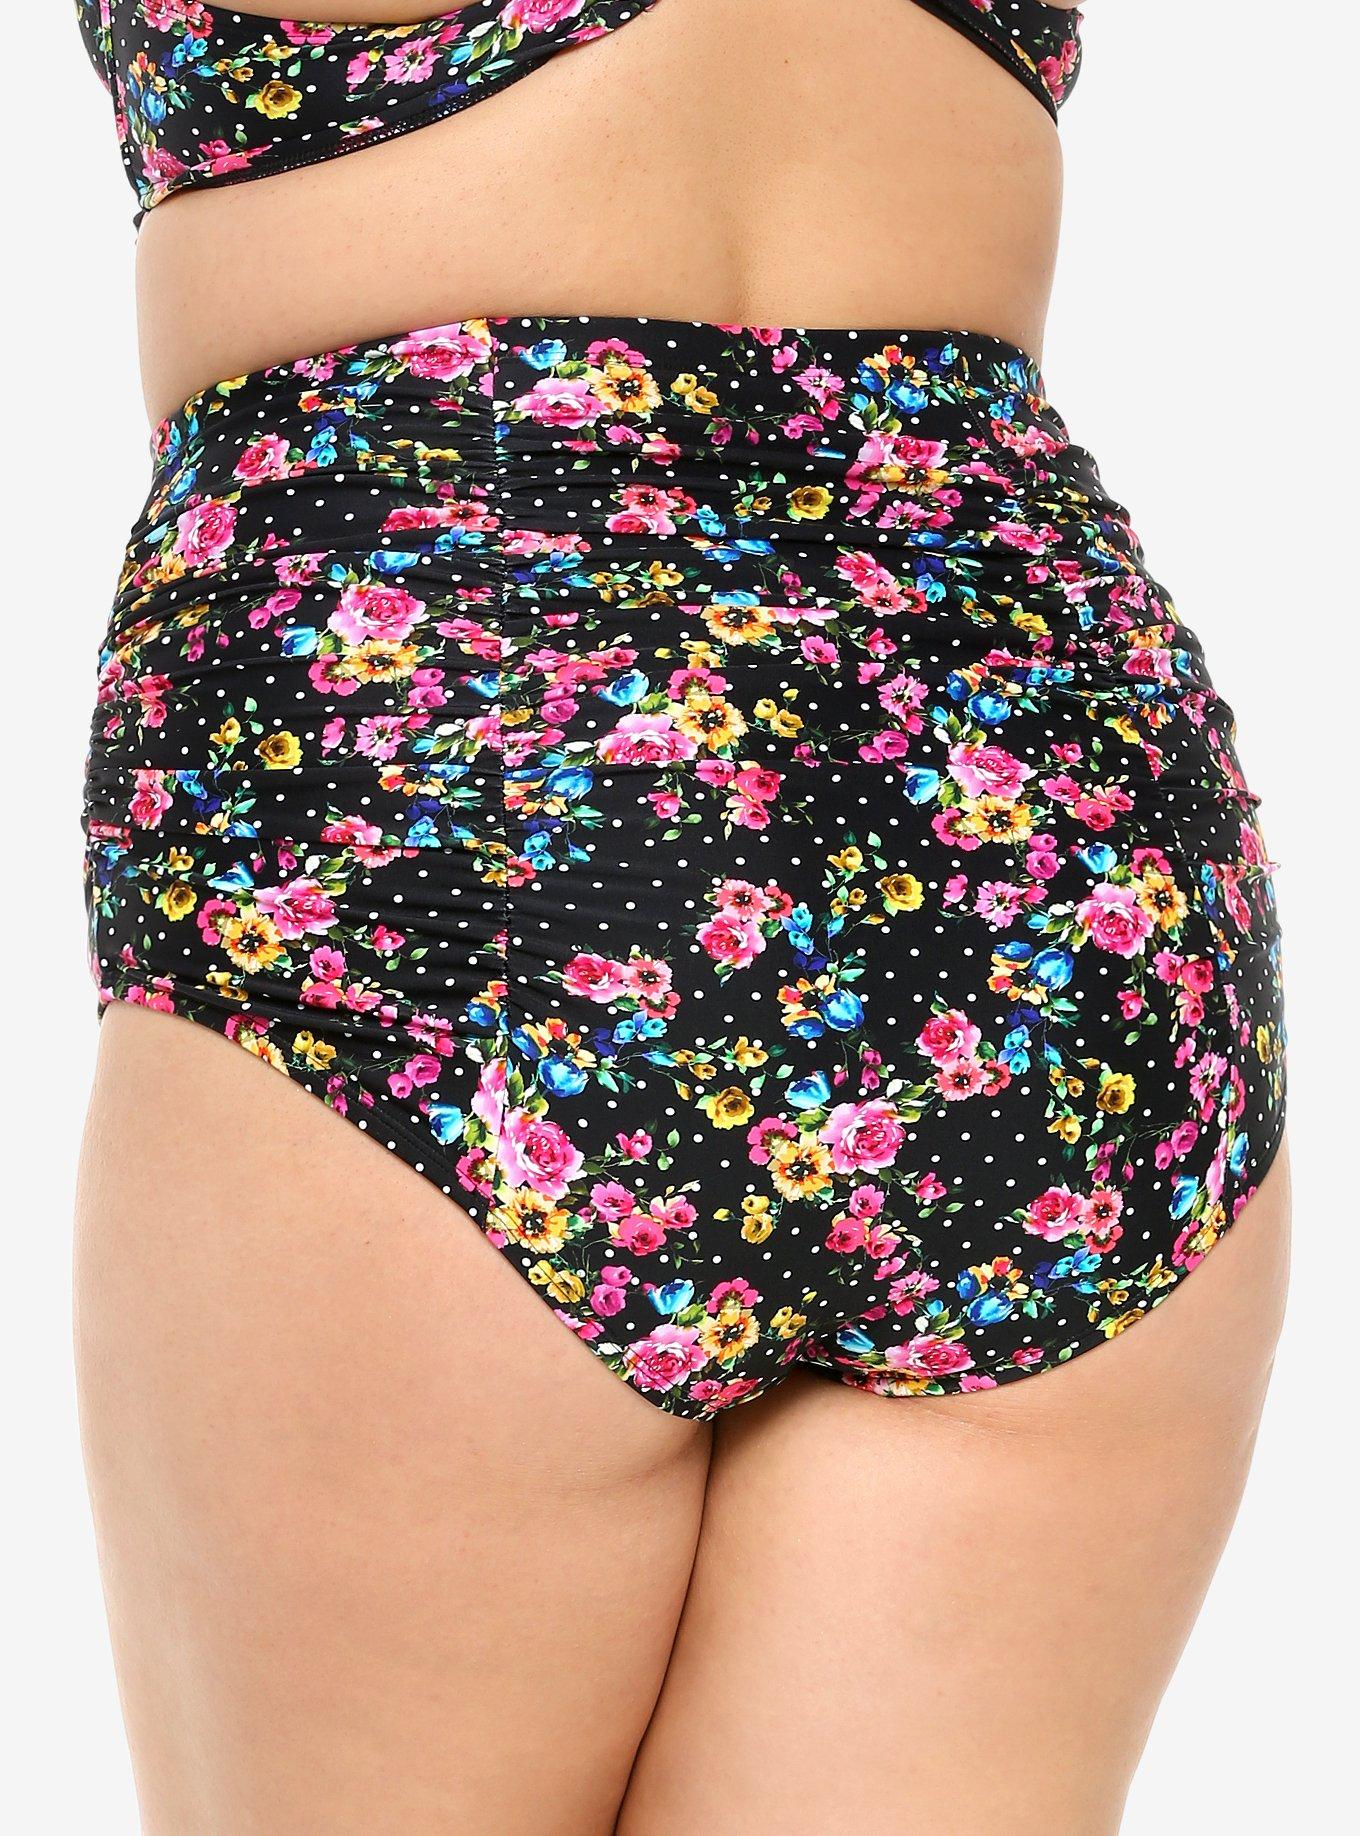 Bright Floral & Polka Dot Ruched High-Waisted Swim Bottoms Plus Size, MULTI, alternate